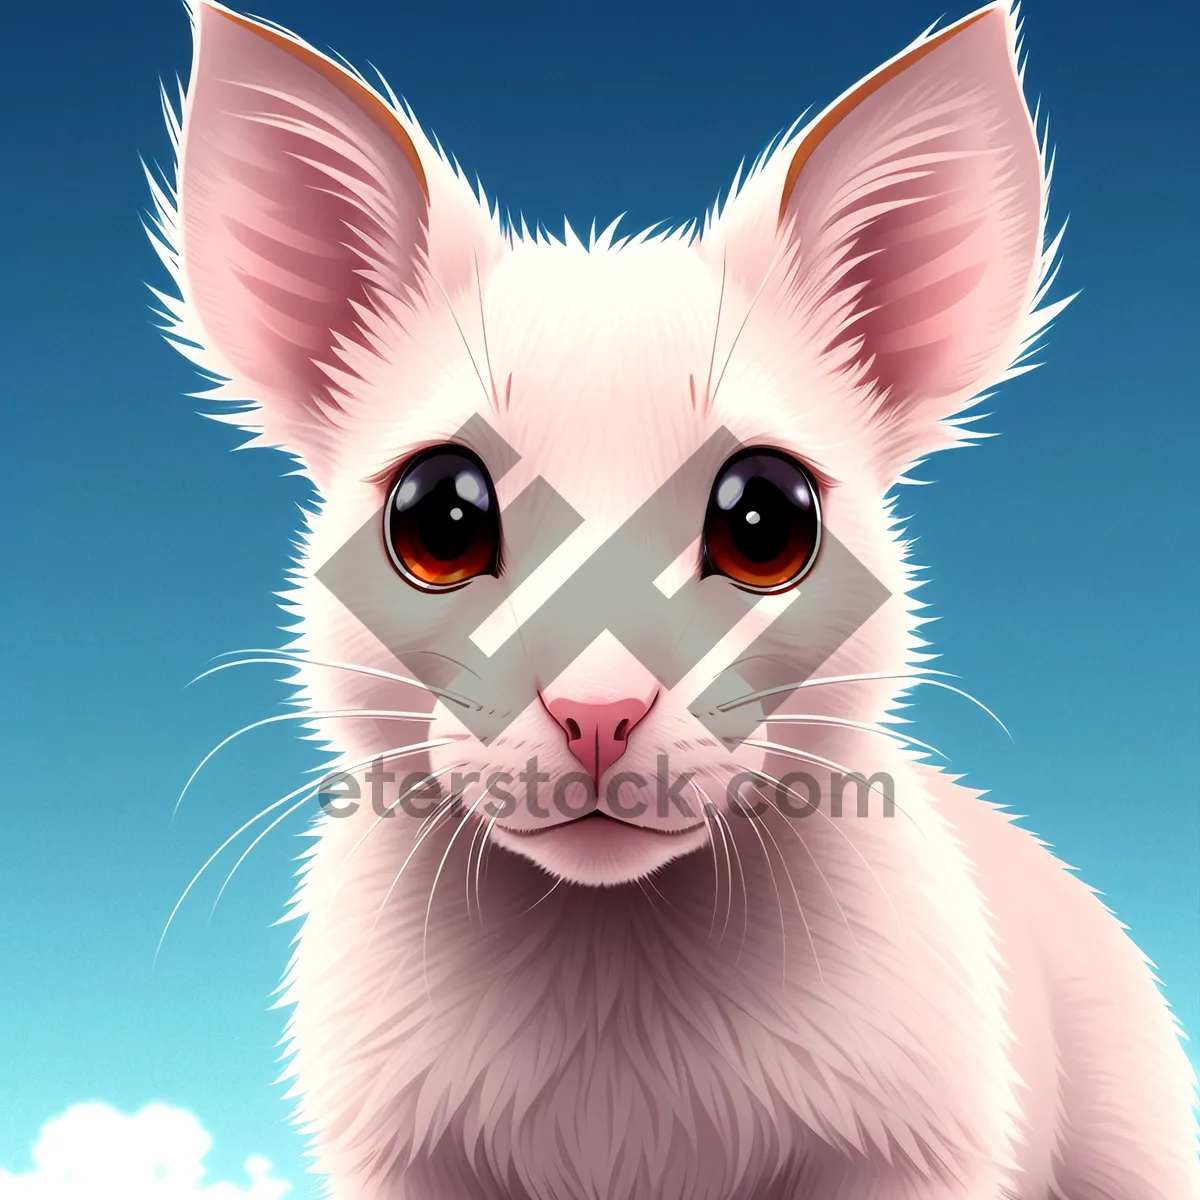 Picture of Fluffy Bunny with Piercing Kitty Eyes